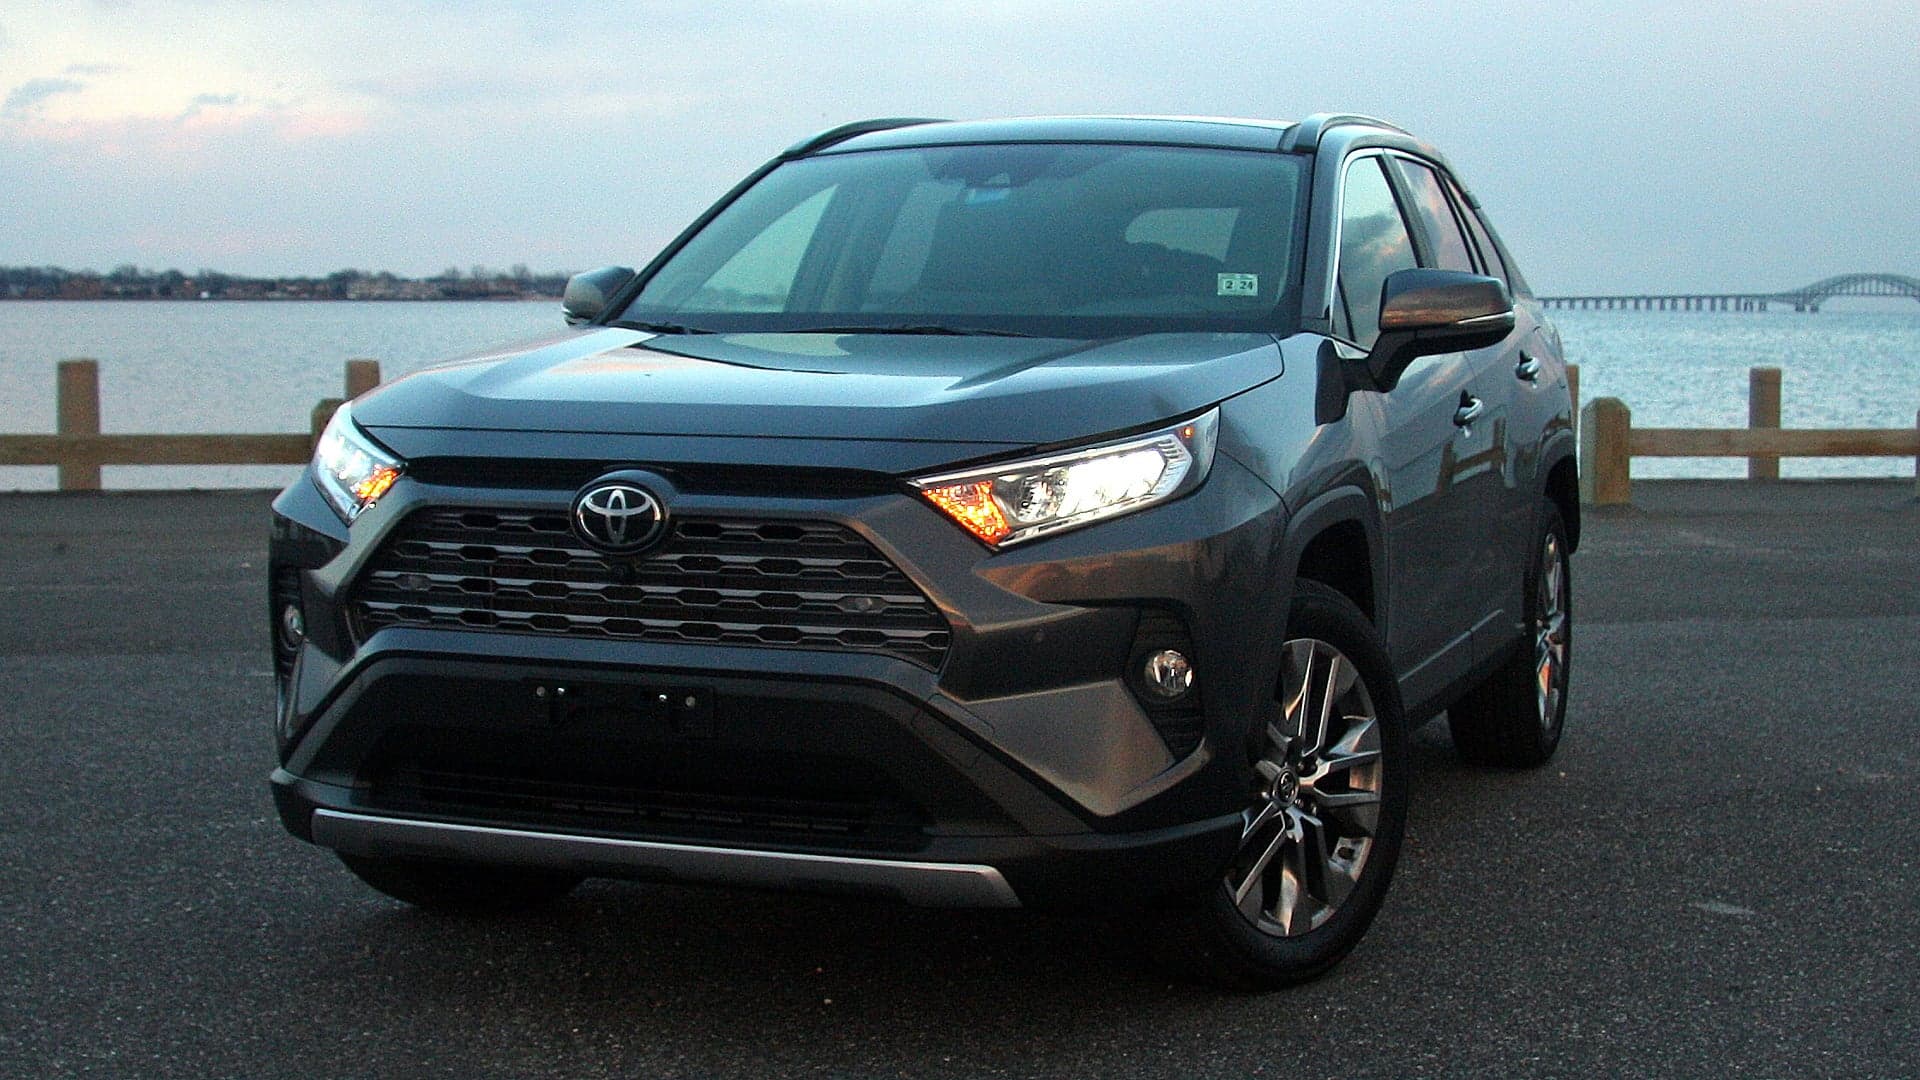 2019 Toyota RAV4 New Dad Review: A Crossover That Checks All the Family-Friendly Boxes